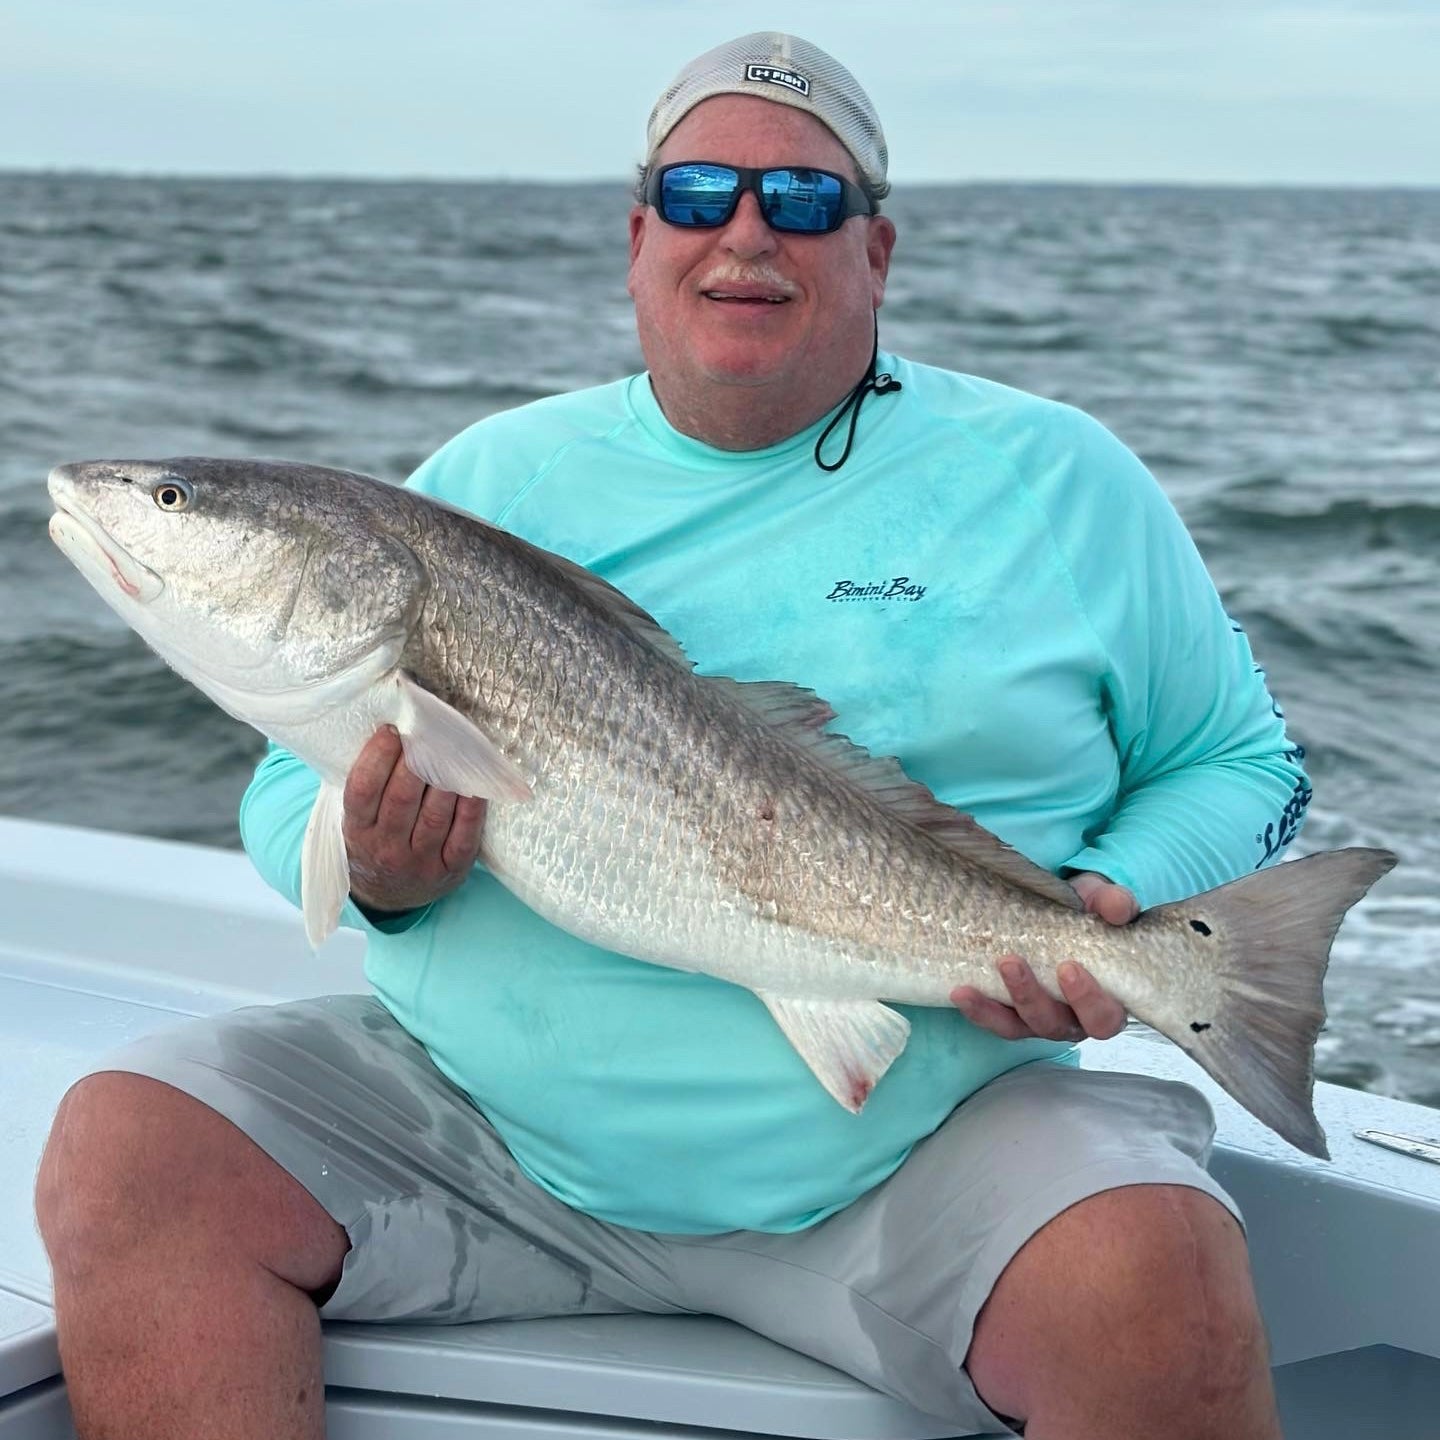 Monday Mash on some big bulls and sharks nearshore and some nice slot size reds and black drum inshore in the creeks.